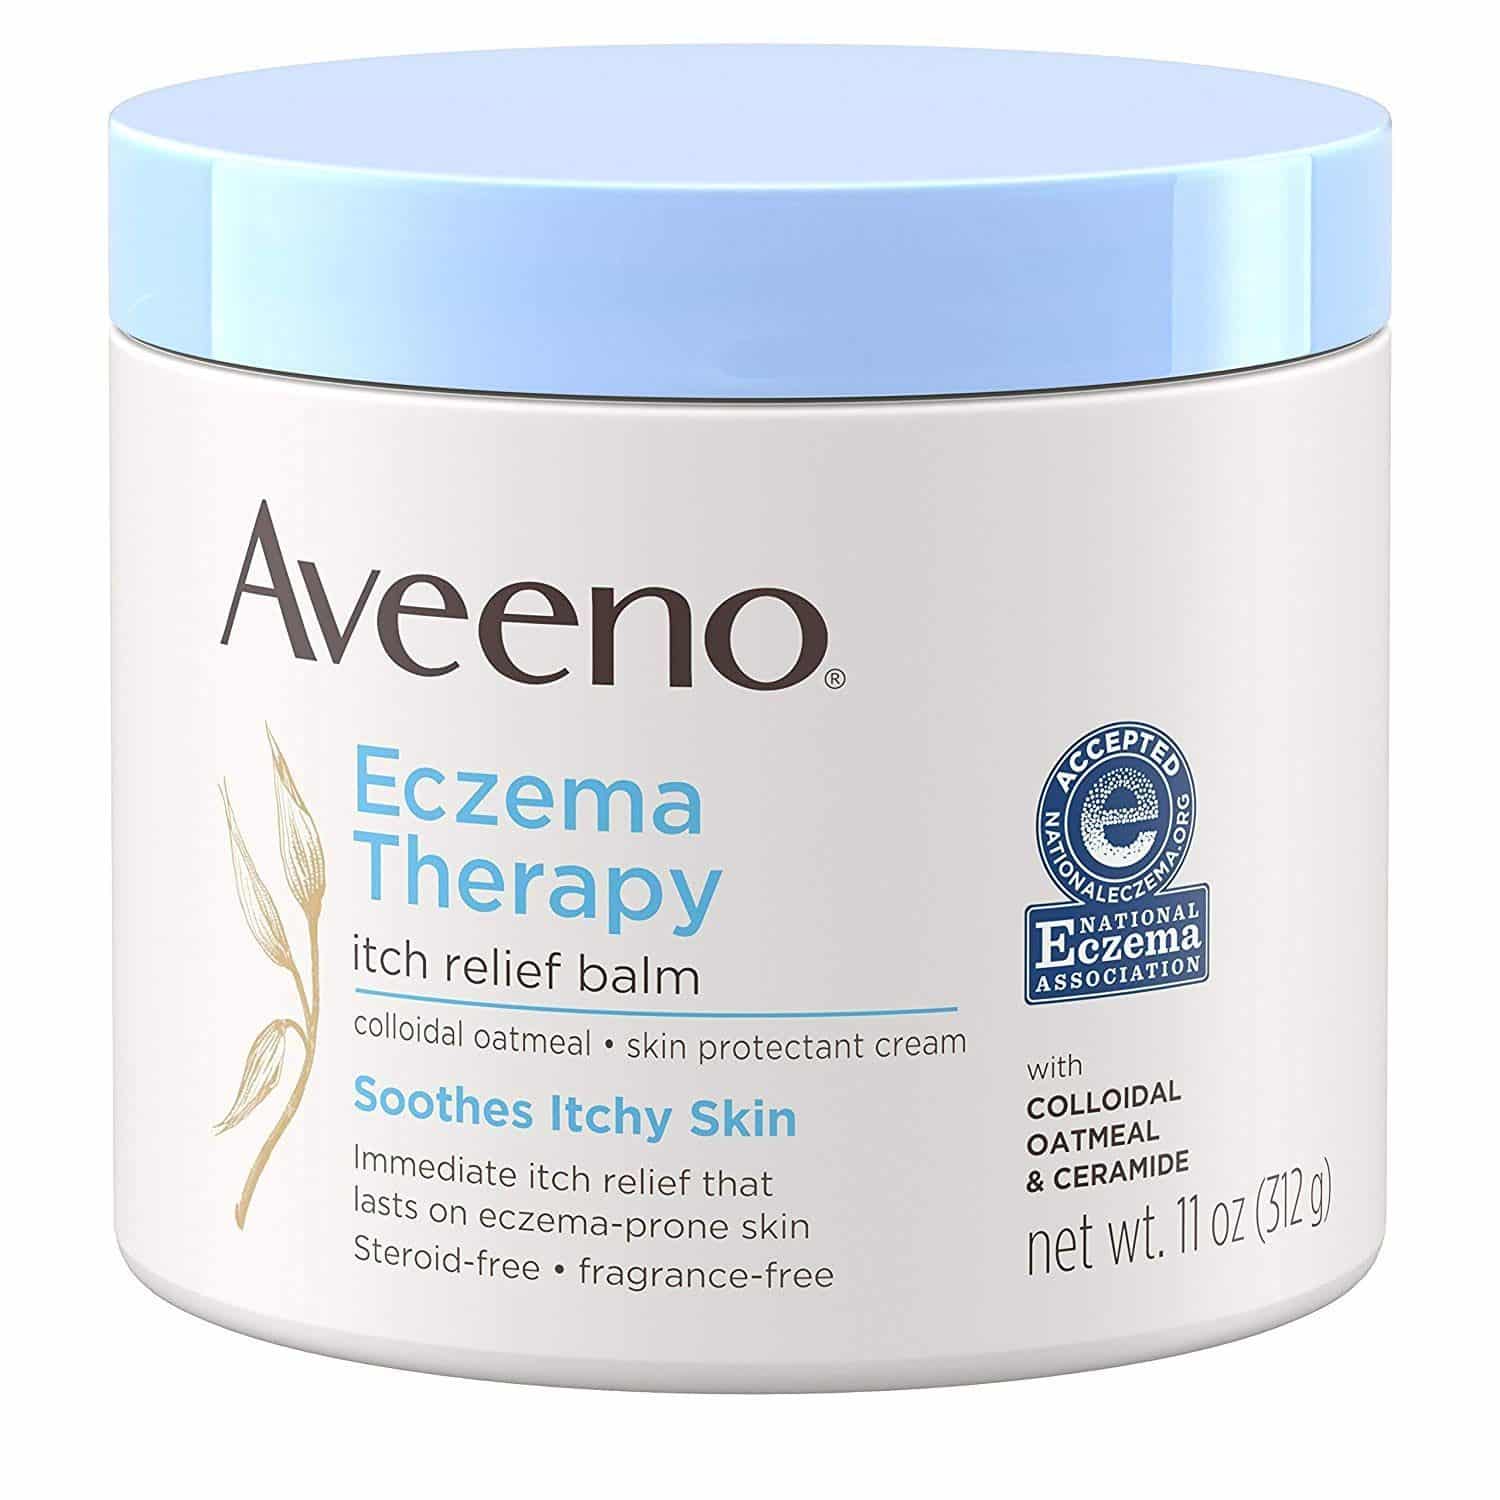 The 9 Best Creams For Treating Eczema At Home, According To Experts ...